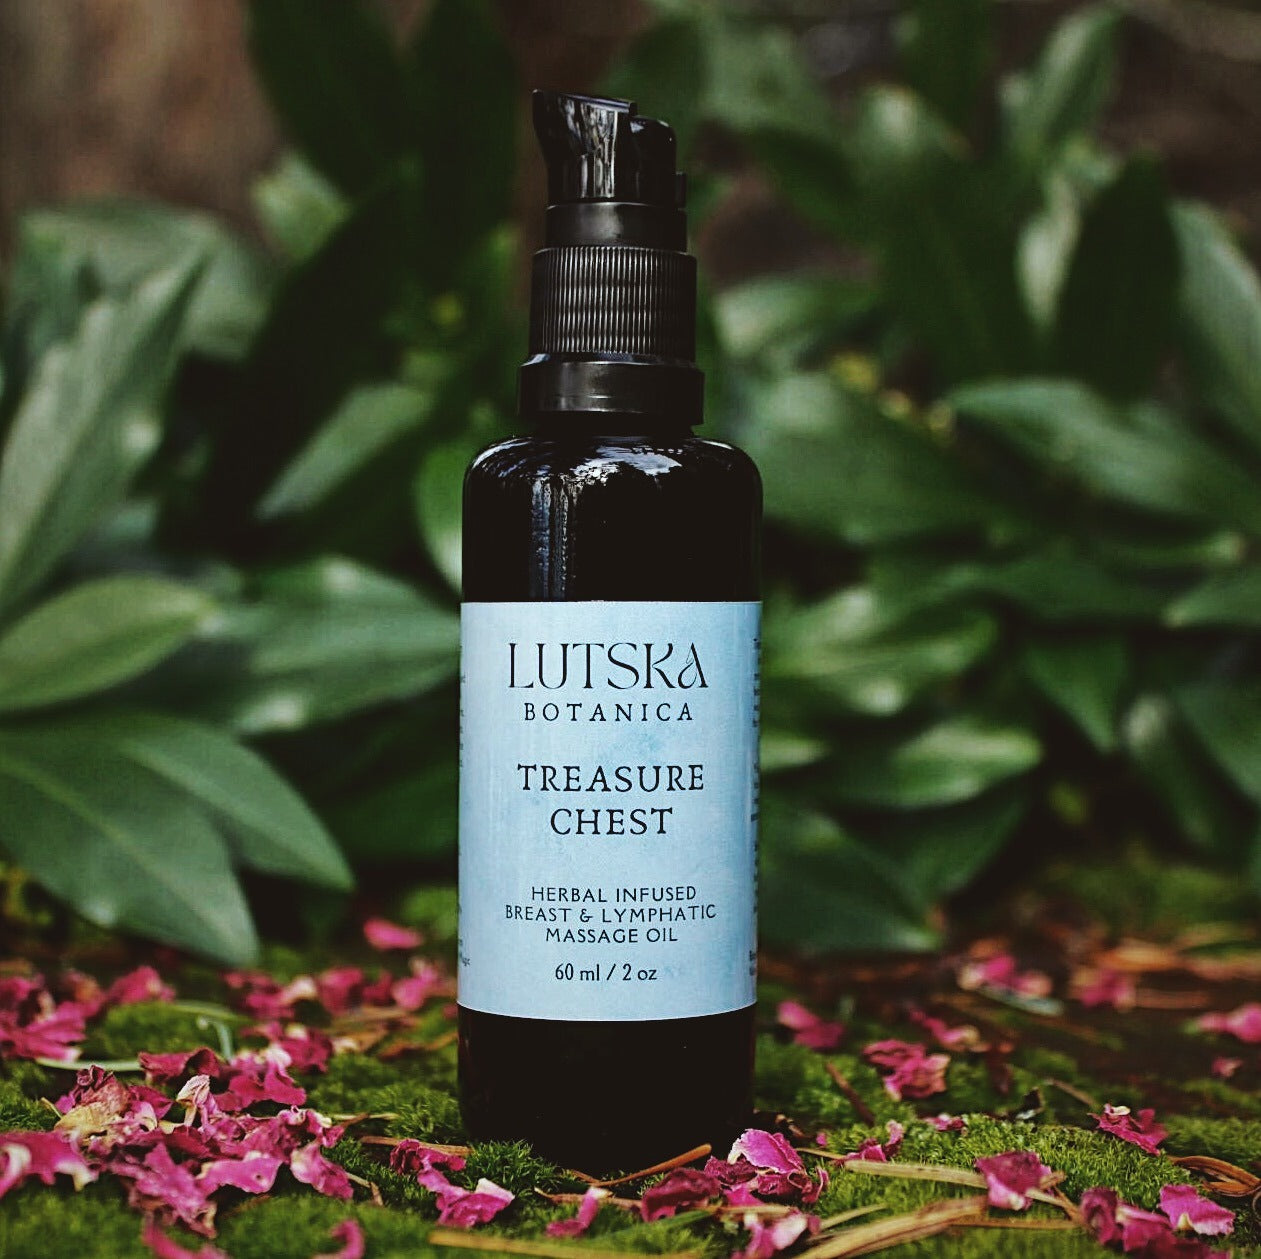 breast massage oil - lymphatic massage oil - herbal infused, no essential oils, made without essential oils - plant magic apothecary